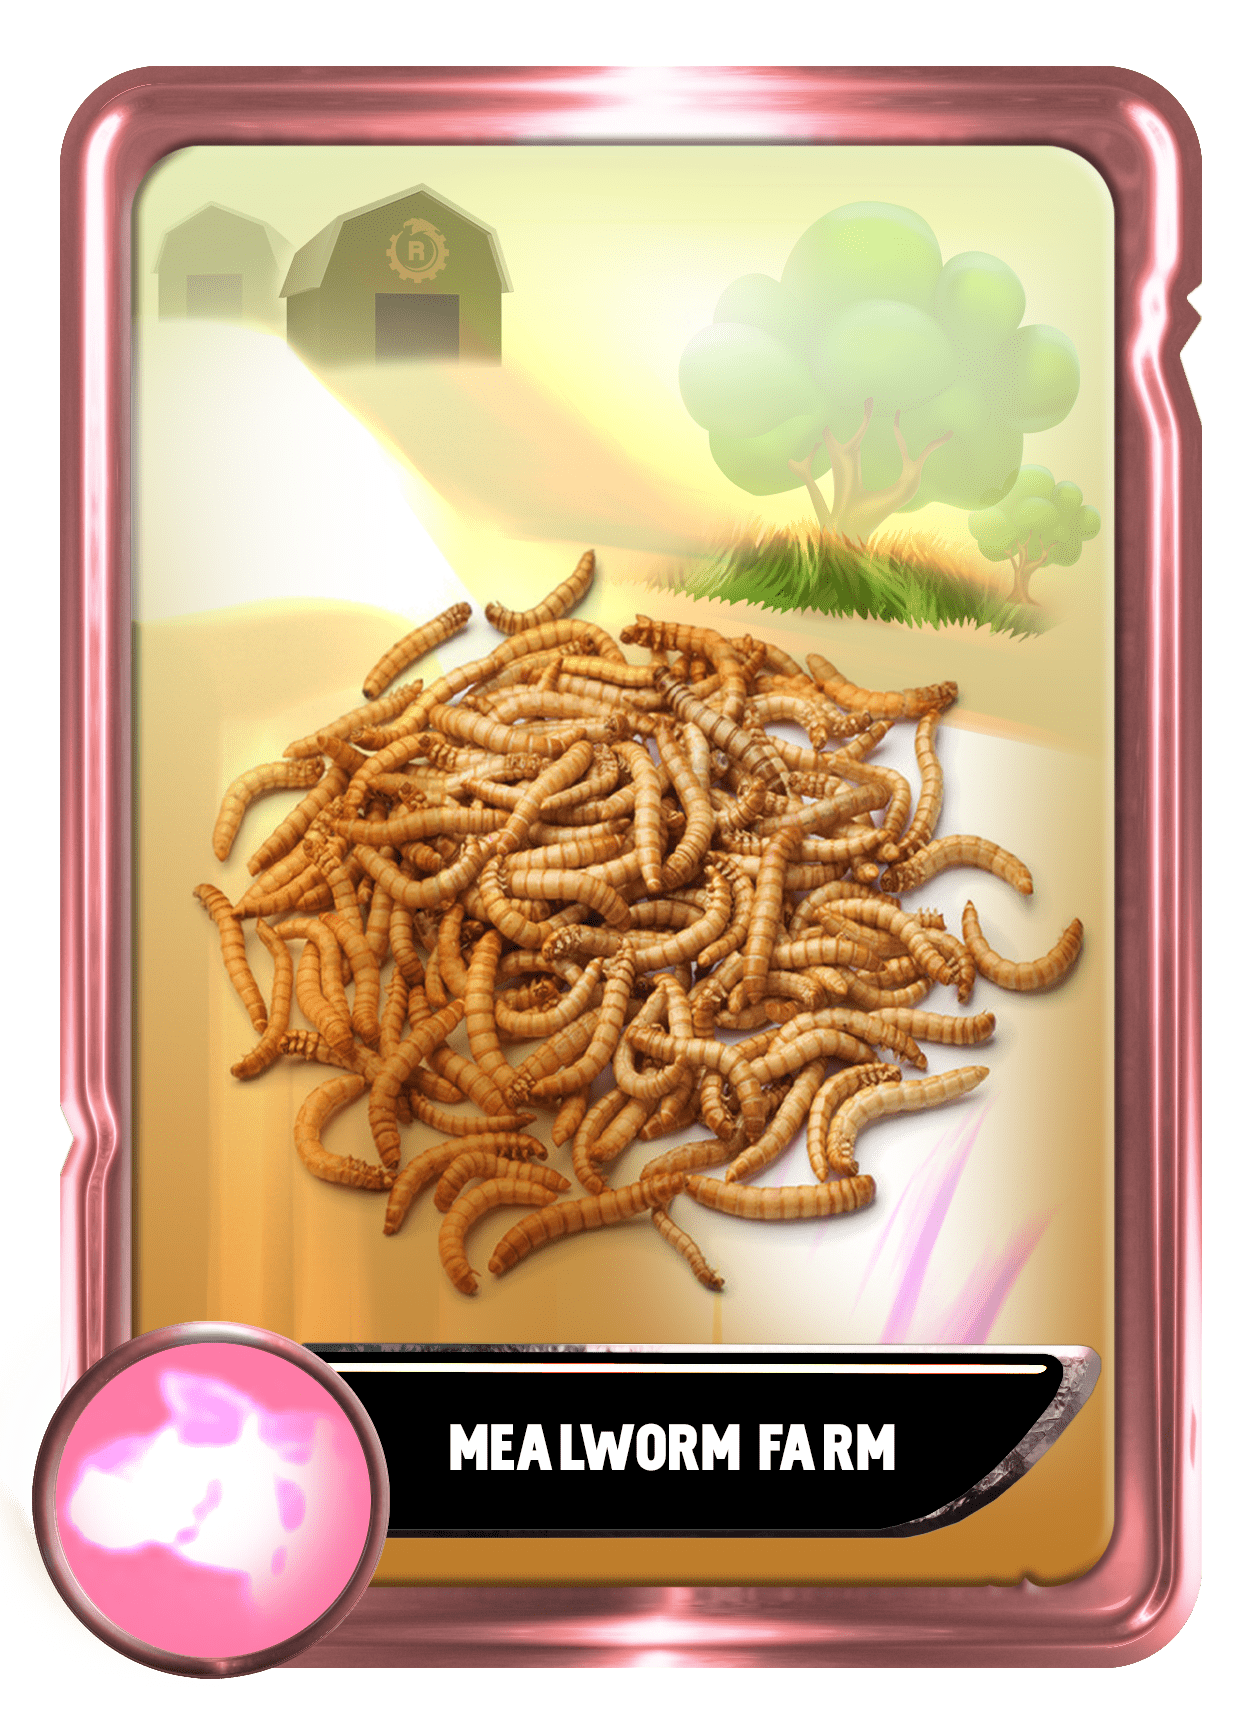 Live Giant Mealworms, Live Giant Meal Worms